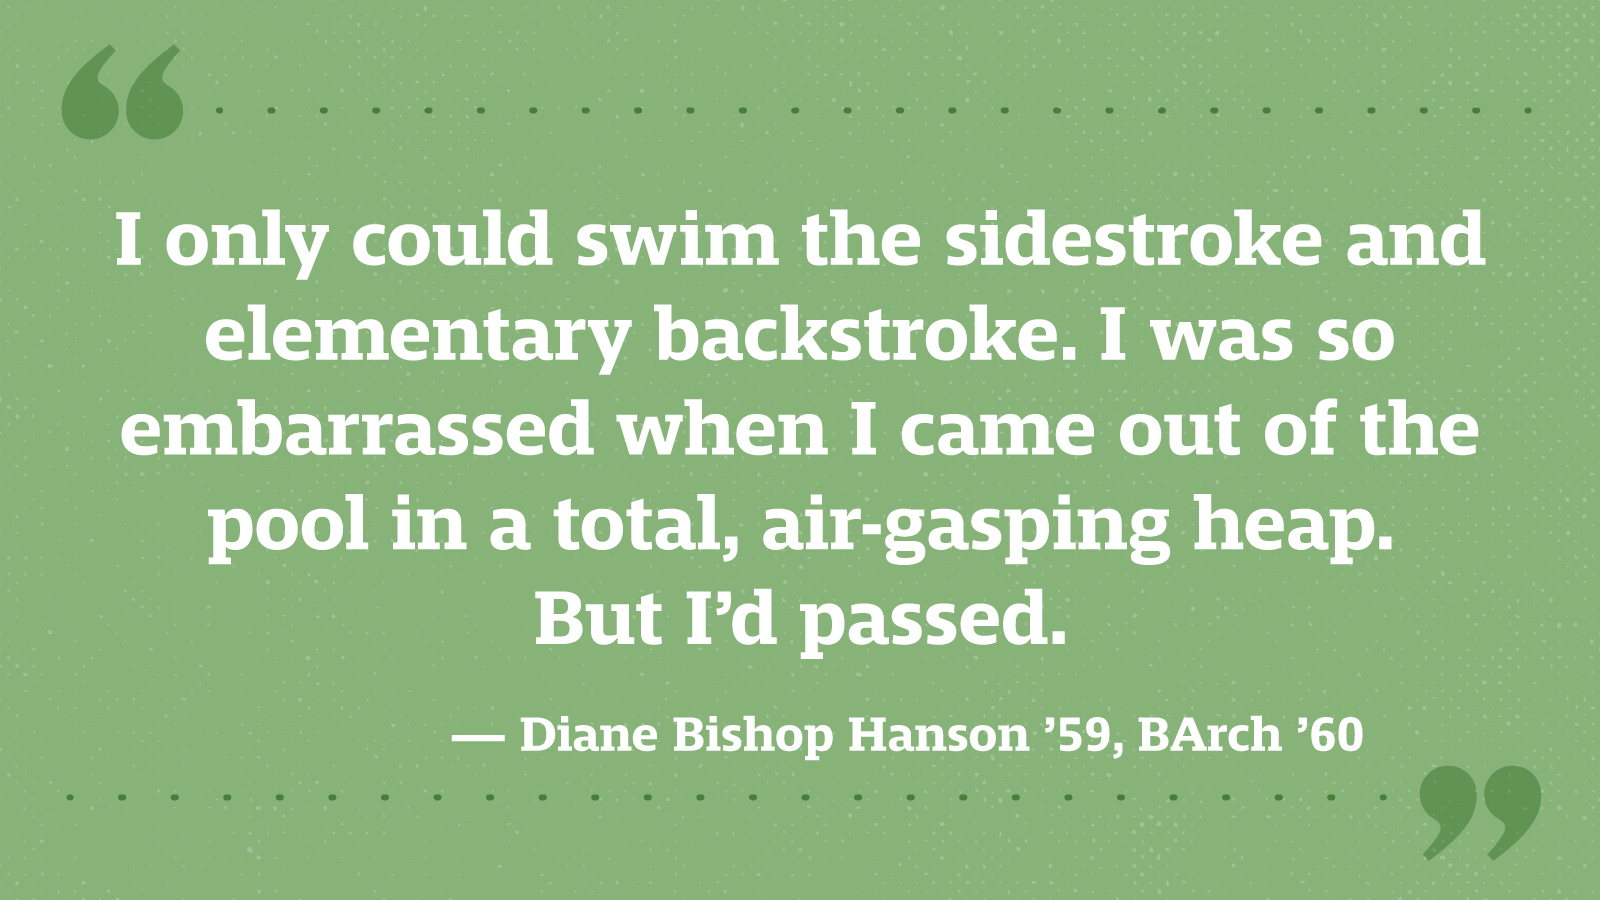 I only could swim the sidestroke and elementary backstroke. I was so embarrassed when I came out of the pool in a total, air-gasping heap. But I’d passed. — Diane Bishop Hanson ’59, BArch ’60